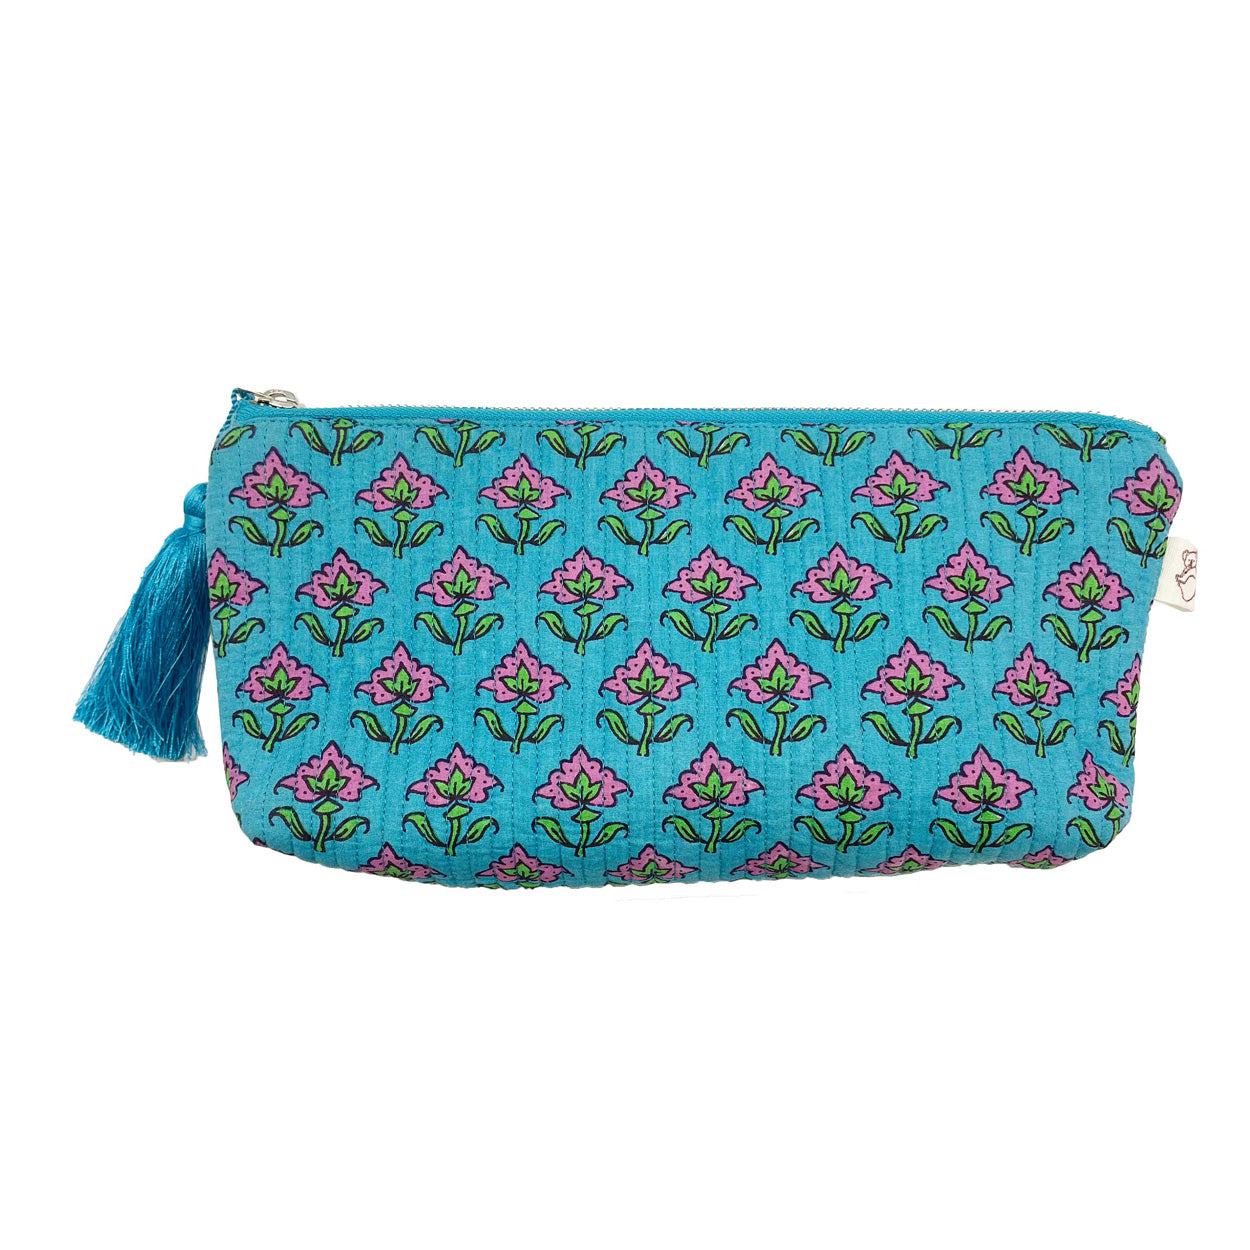 Hold Me Clutch - Quilted Blue Floral  NEW! - Quilted Koala